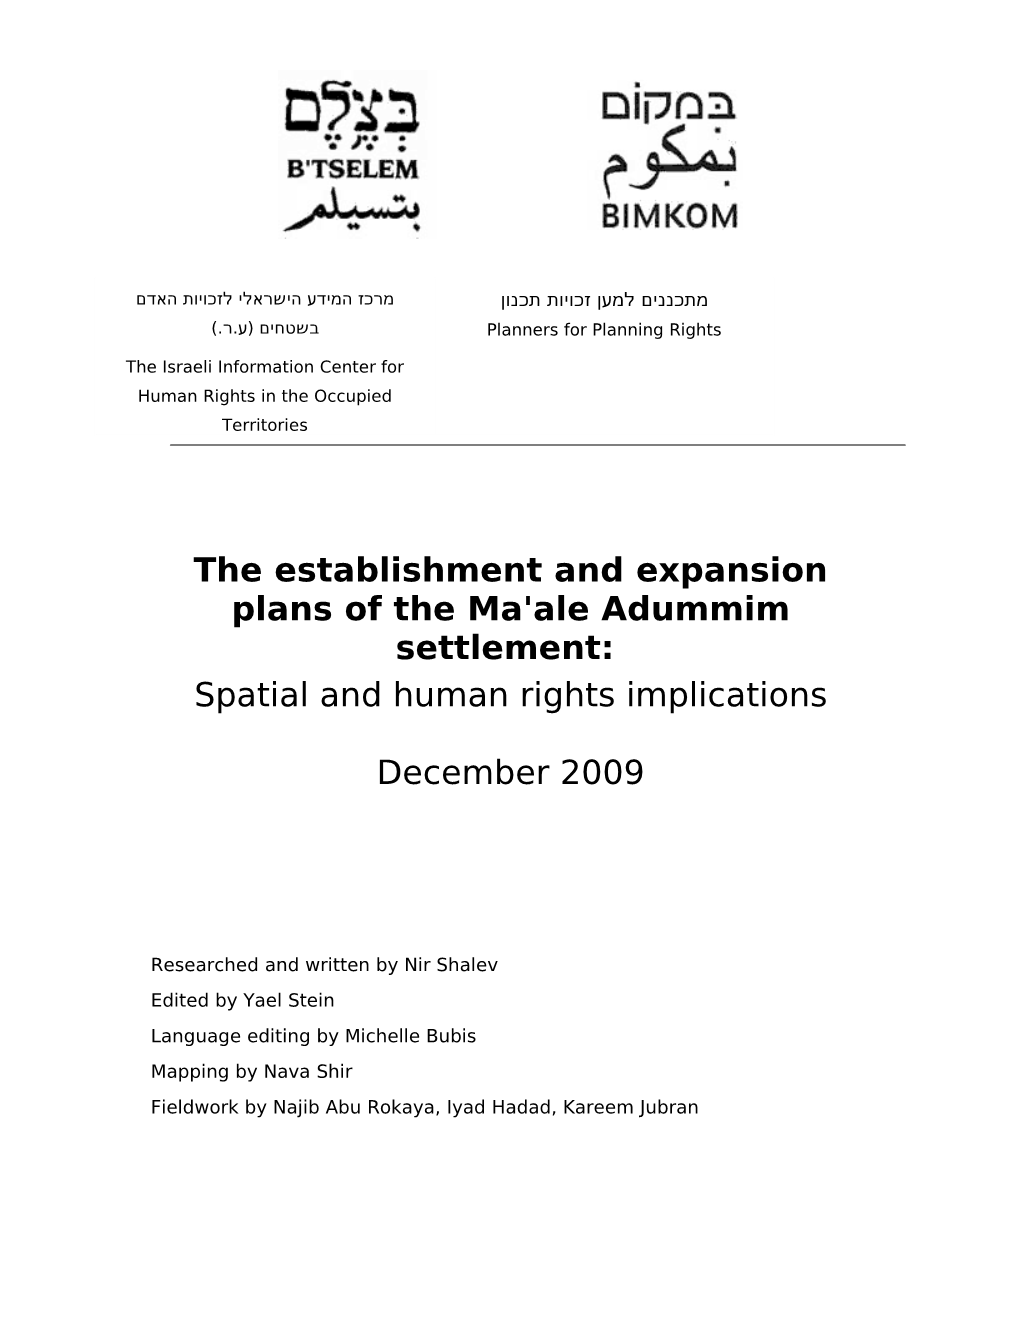 The Establishment and Expansion Plans of the Ma'ale Adummim Settlement: Spatial and Human Rights Implications